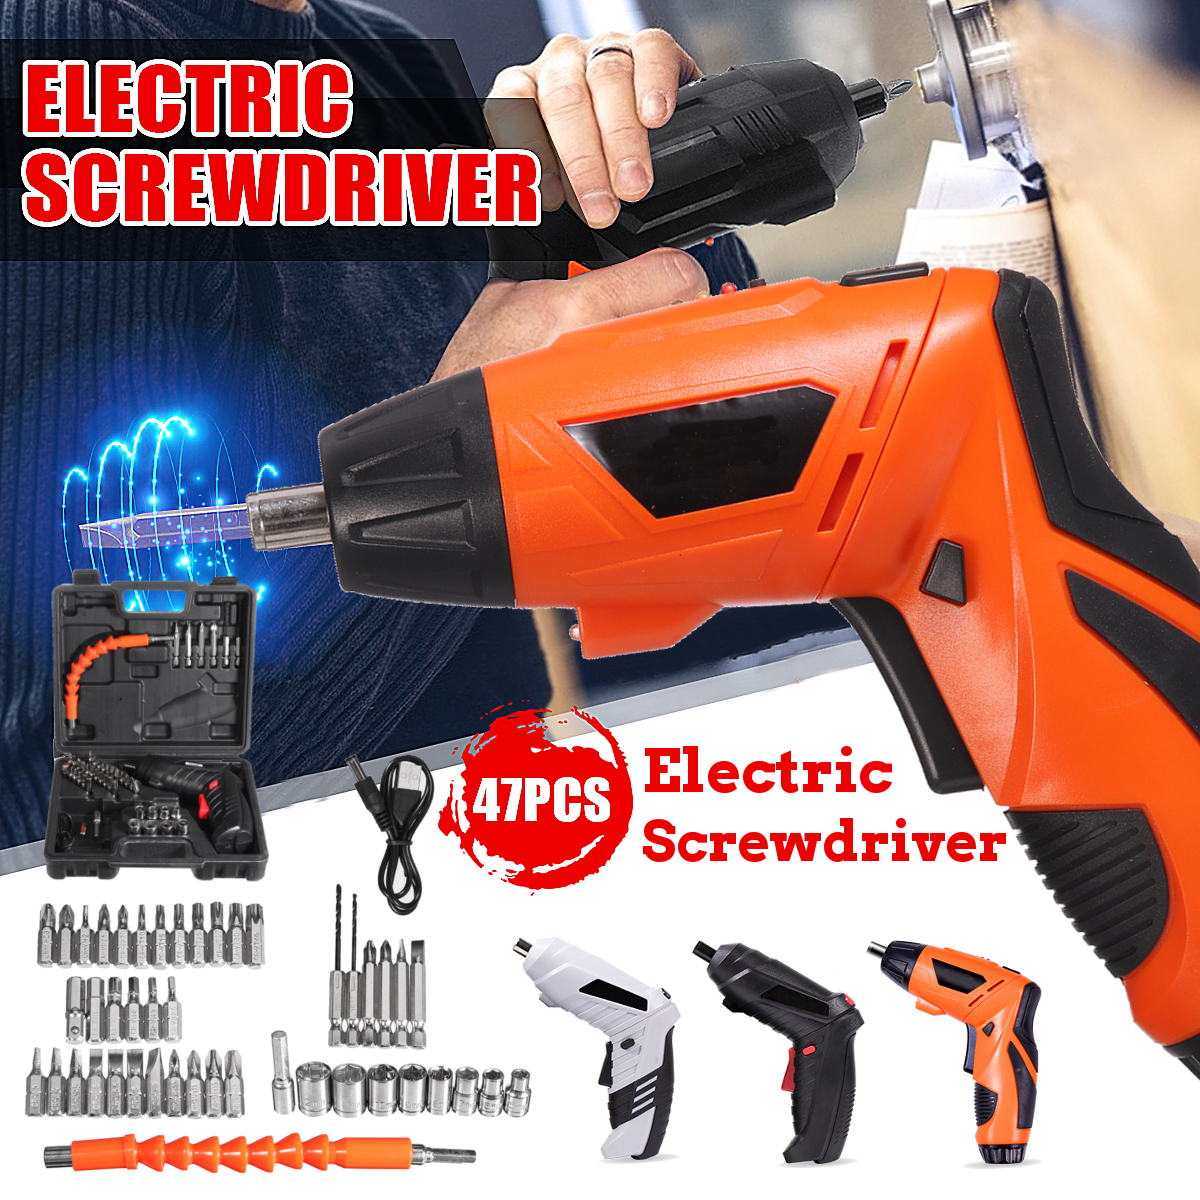 47-in-1-Rechargeable-Wireless-Cordless-Electric-Screwdriver-Drill-Kit-Power-Tool-Home-Improvement-DI-1780811-1